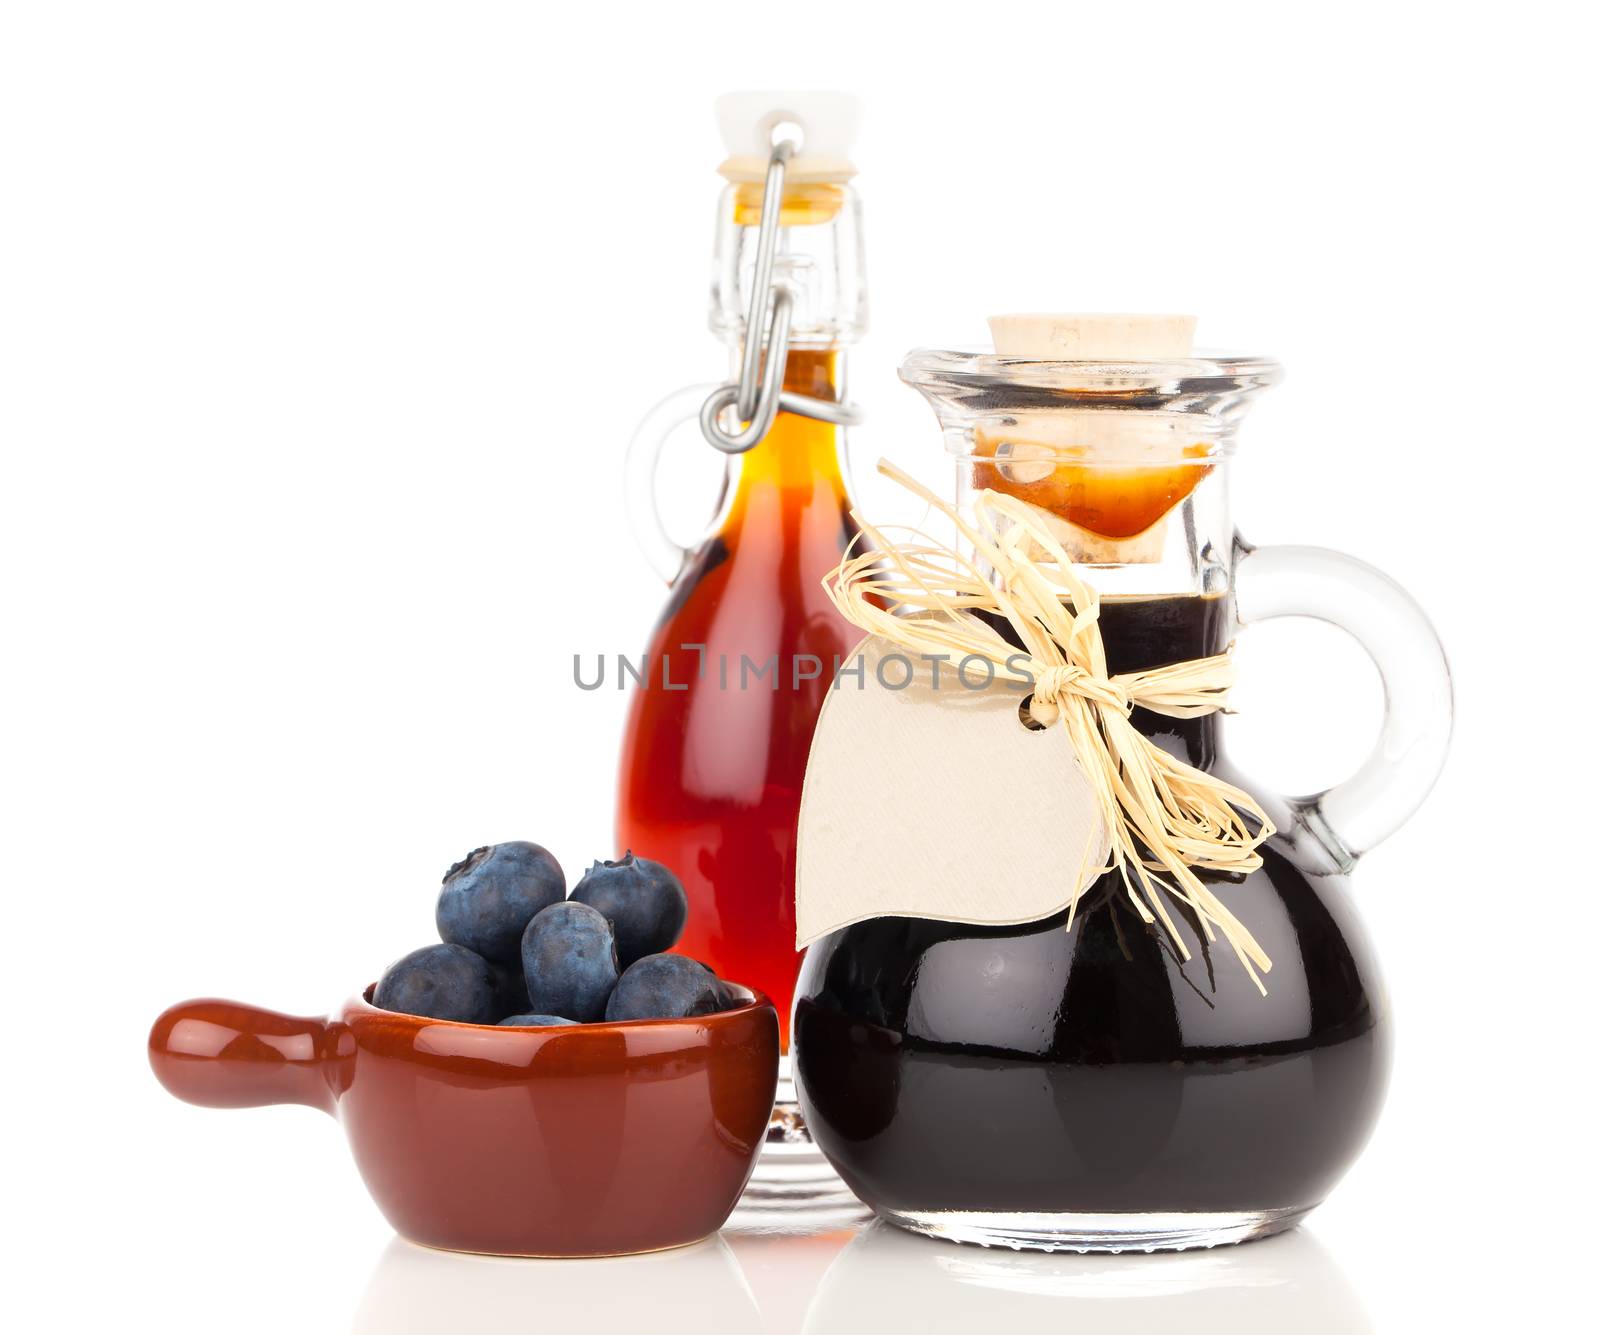 fresh blueberry and blueberry syrup in glass, bottle or mixture, on white background